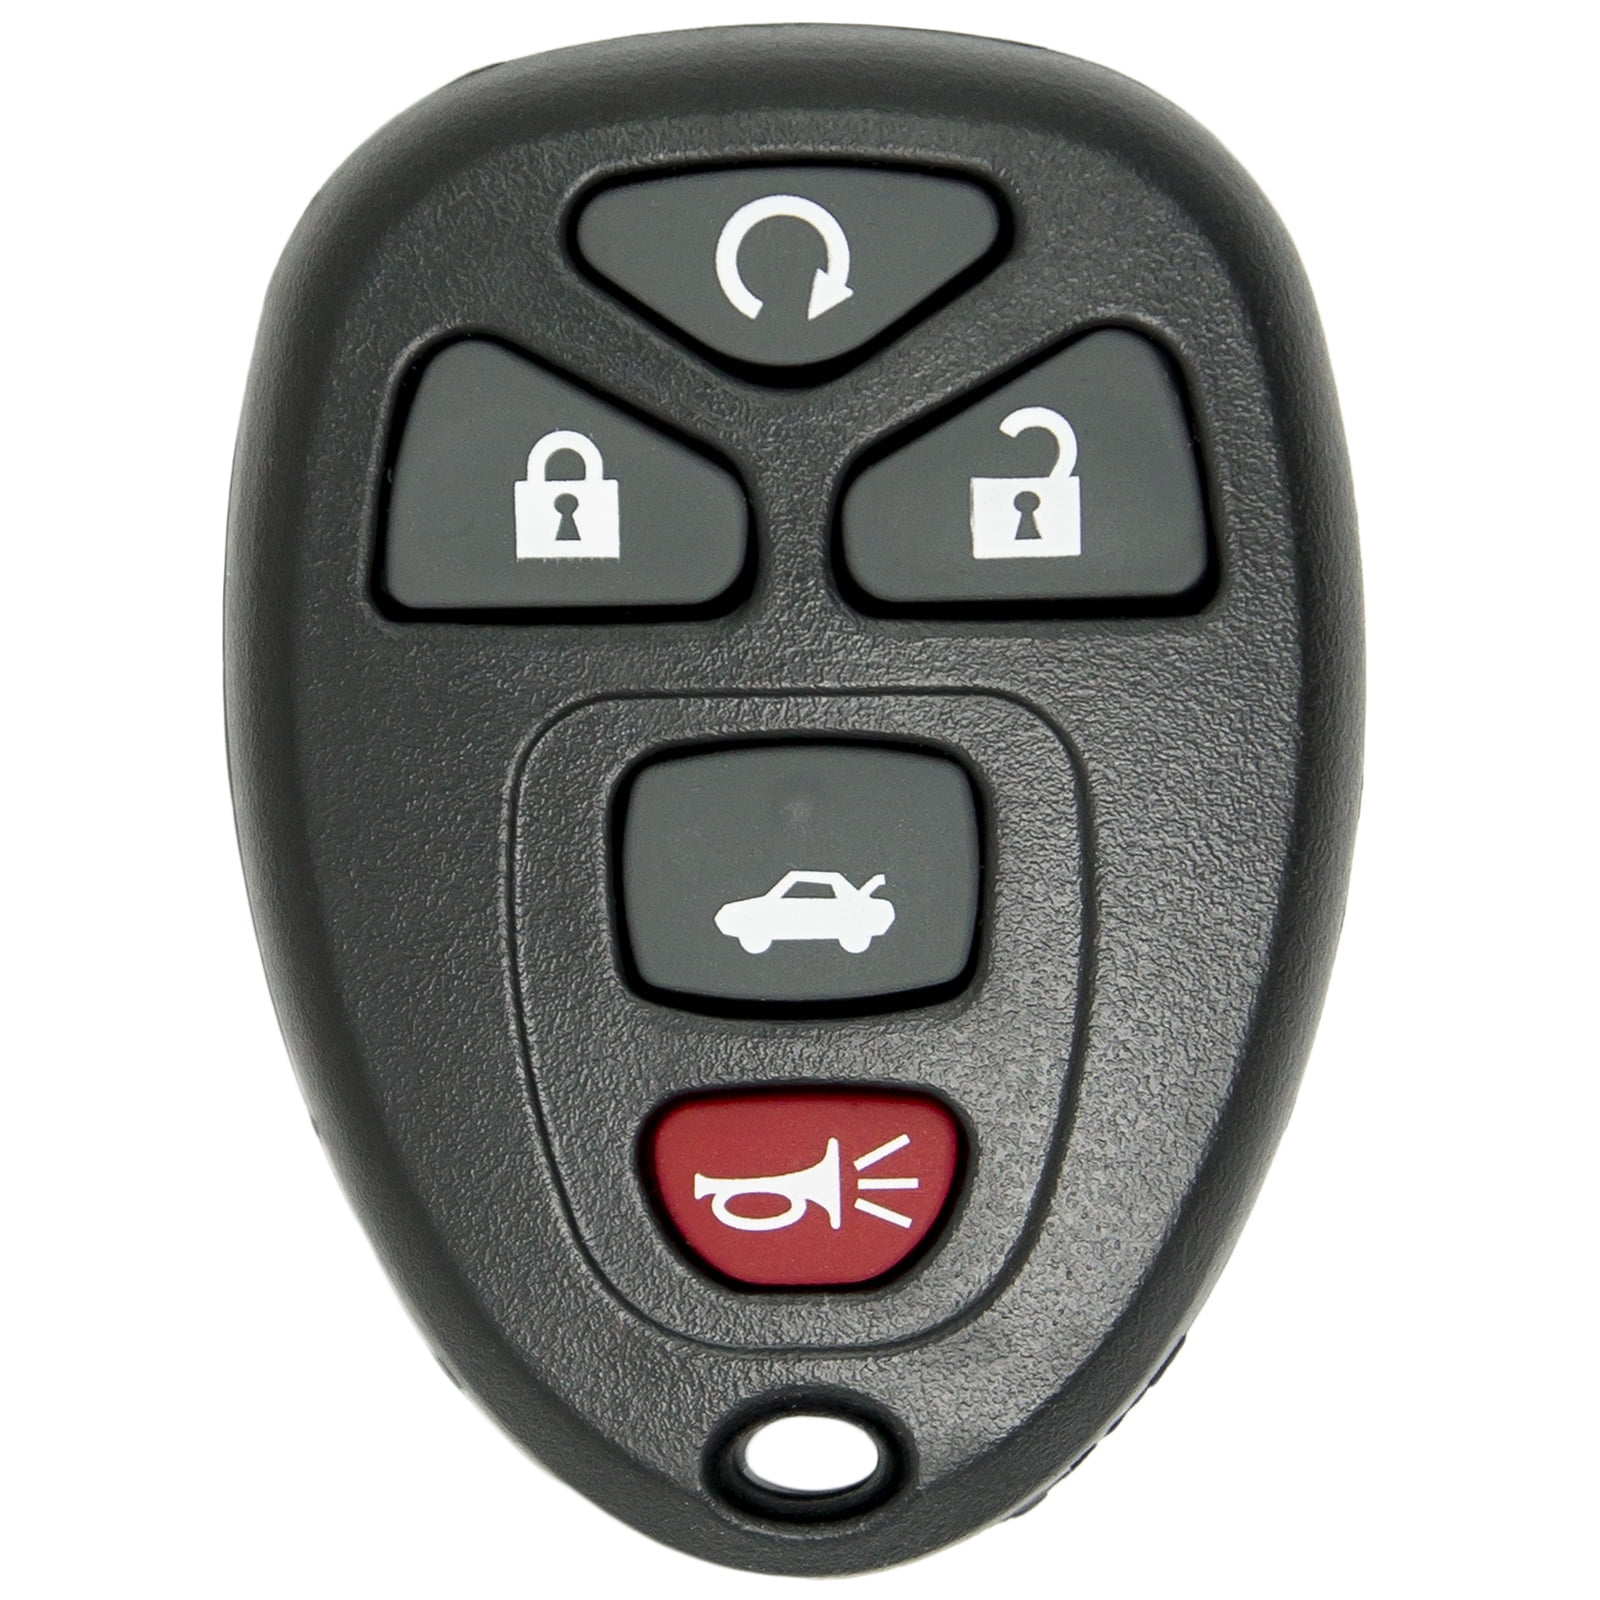 Shell Only 1x New Replacement Keyless Remote Key Fob For GM Chevy 22733524